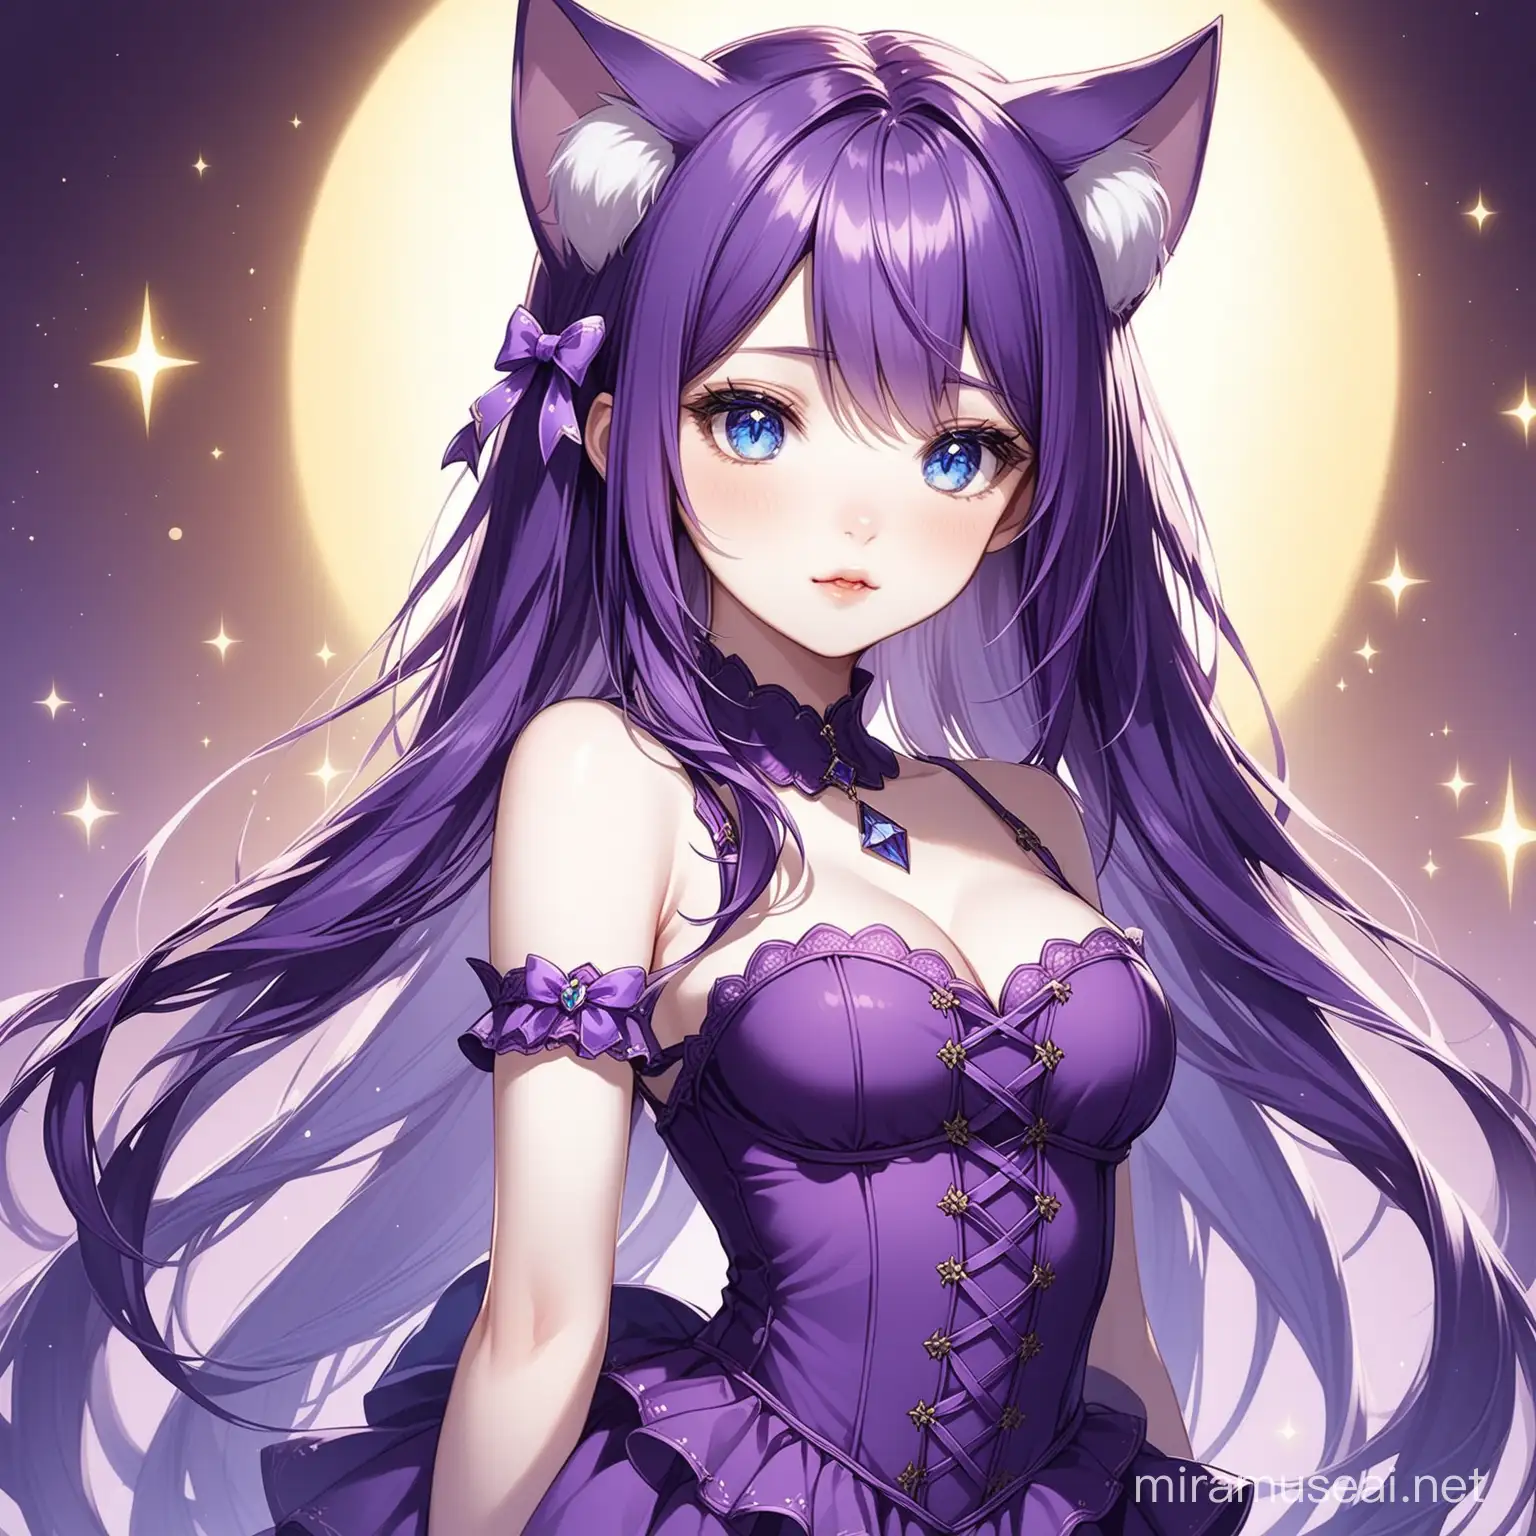 Fantasy Character PurpleHaired Girl with Cat Ears in Magical Outfit